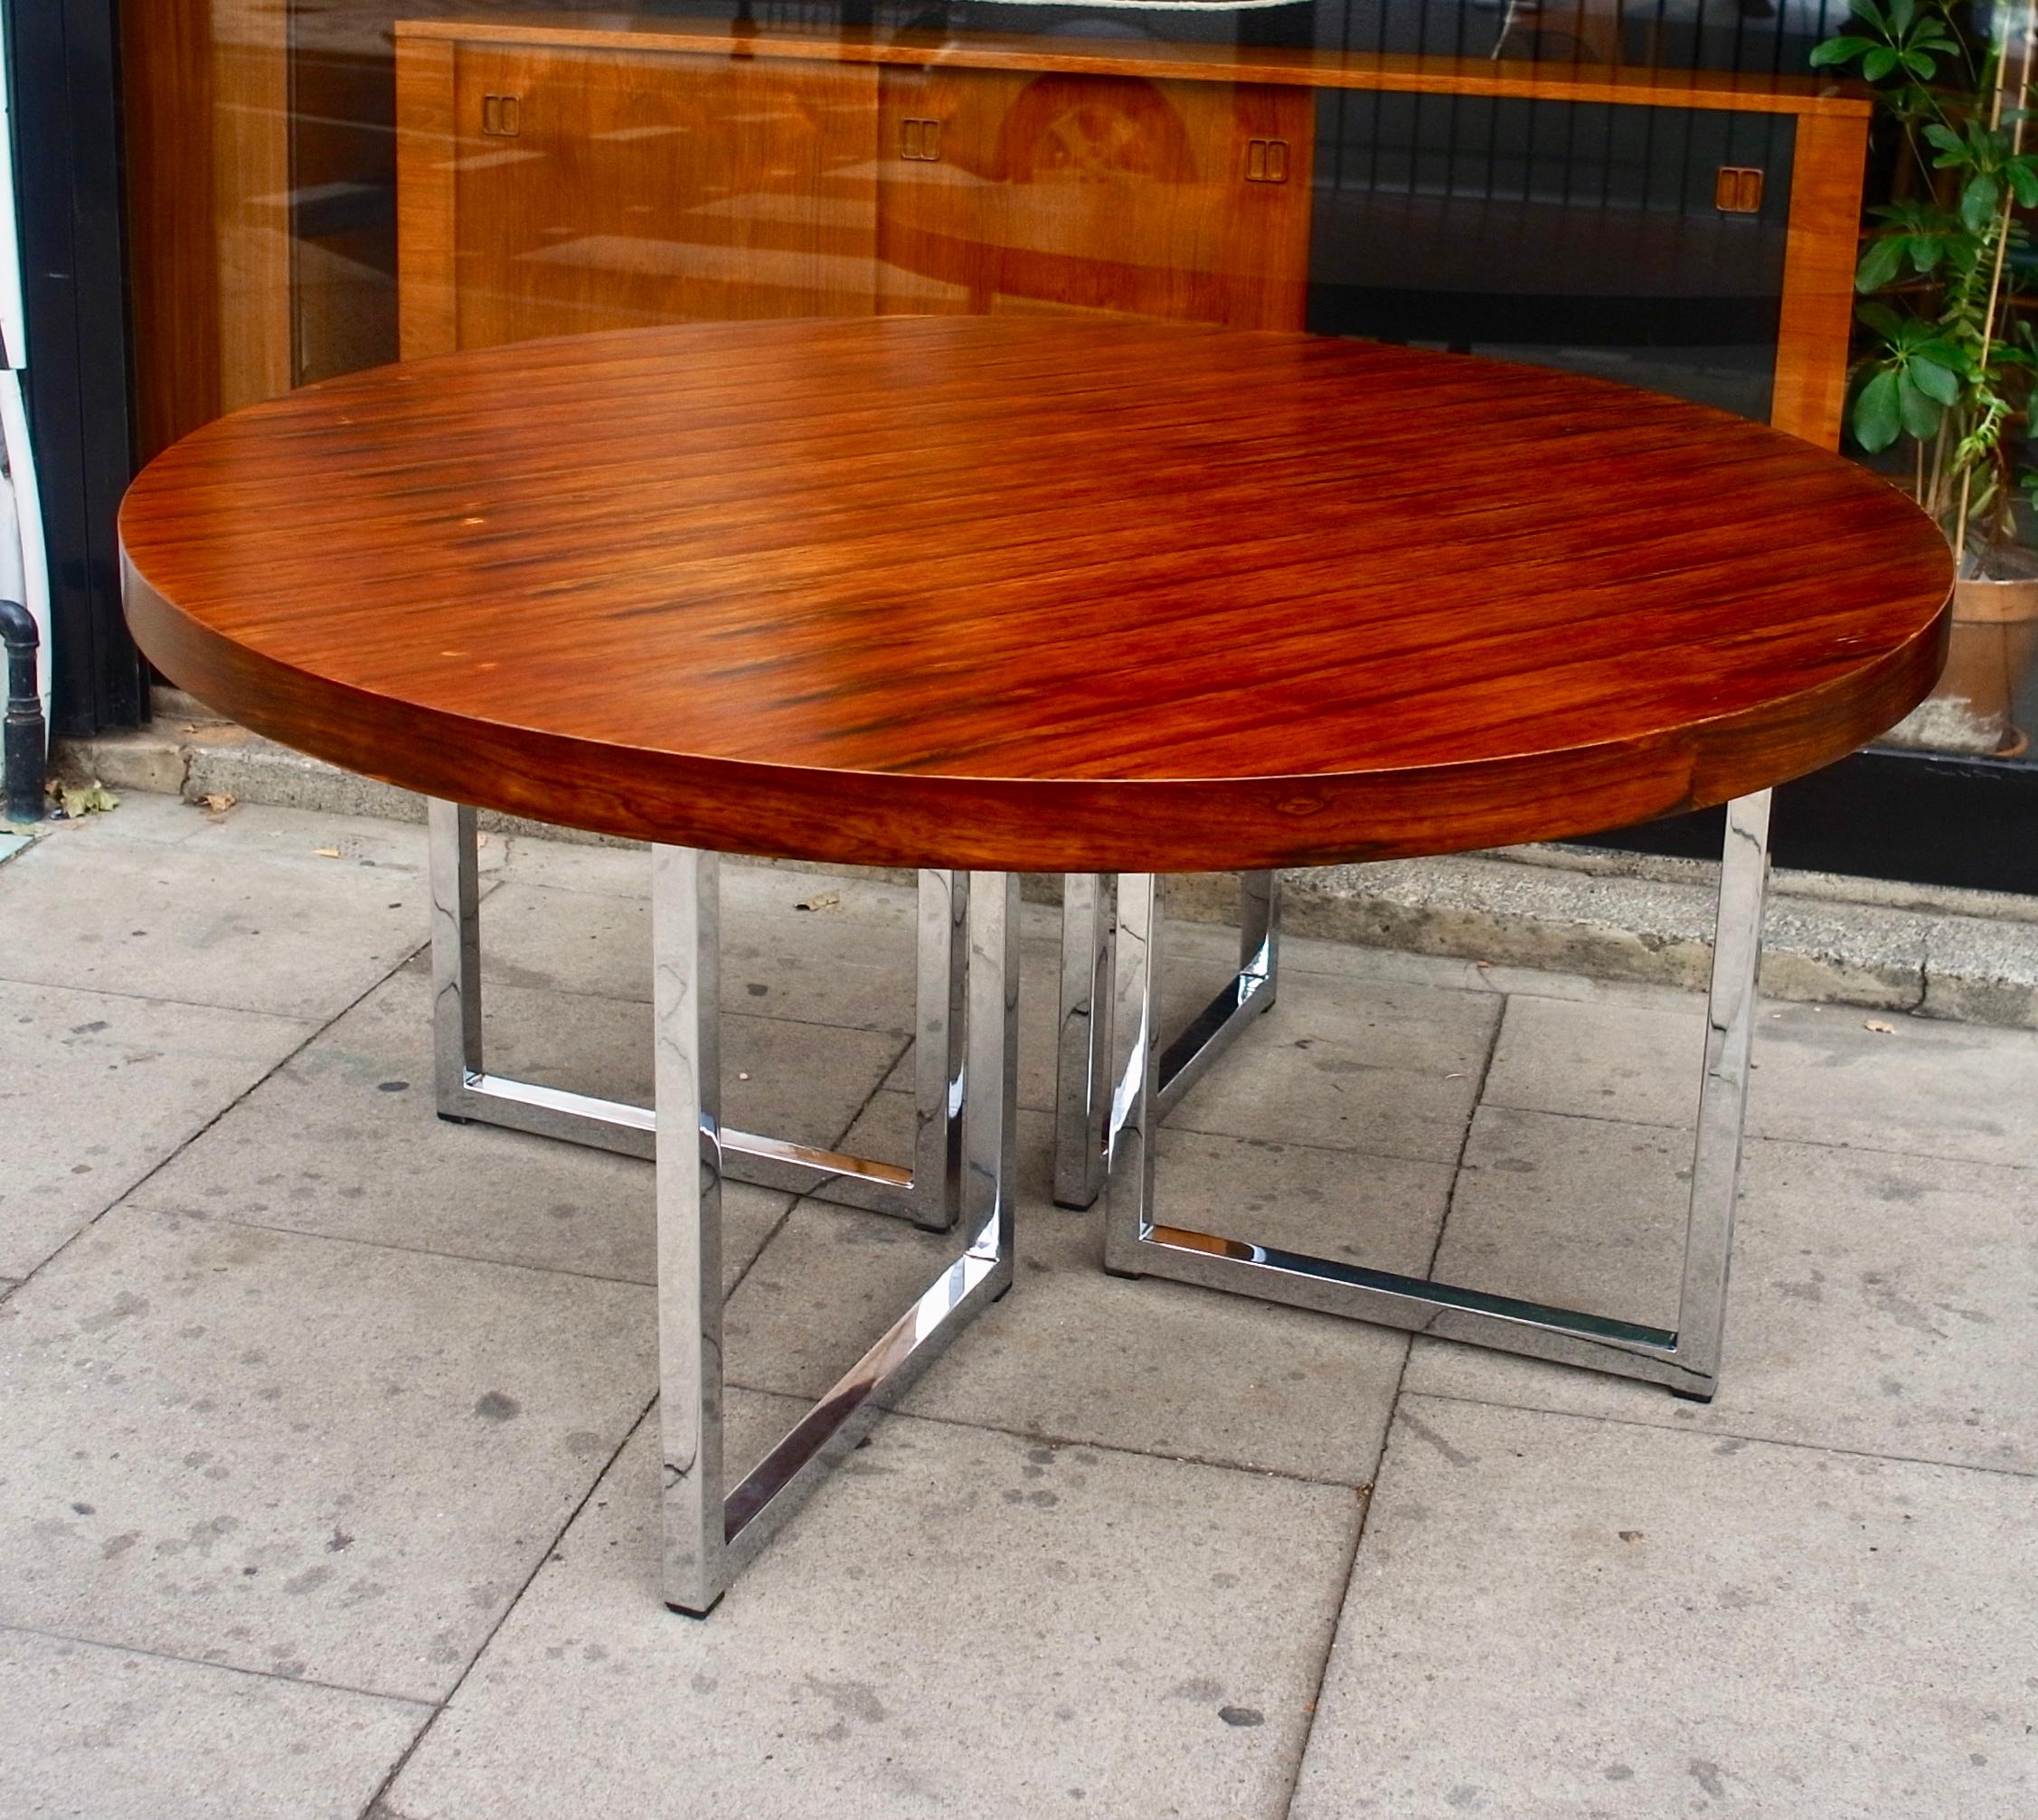 A very beautiful, rare and stylish vintage round 1970s dining table in Rosewood set on square tubular chromed legs. Manufactured by Gordon russell ltd, and designed by Ray Leigh and Trevor Chinn in 1976. This British designed dining table is large